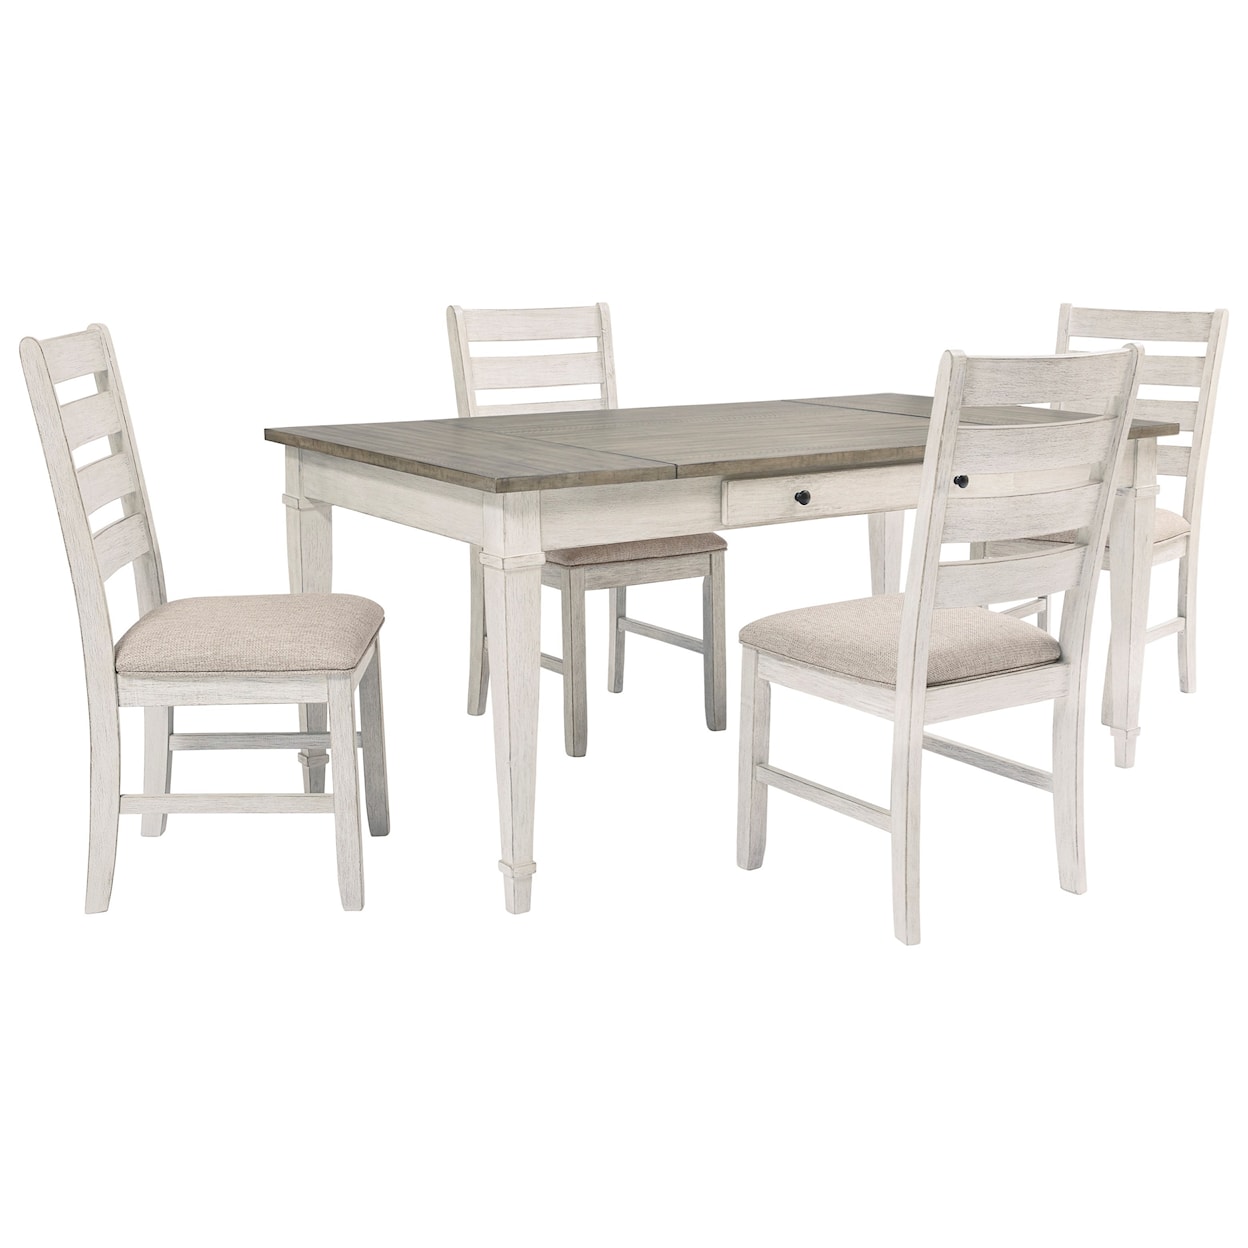 Michael Alan Select Skempton 5-Piece Rect. Dining Room Table w/ Storage